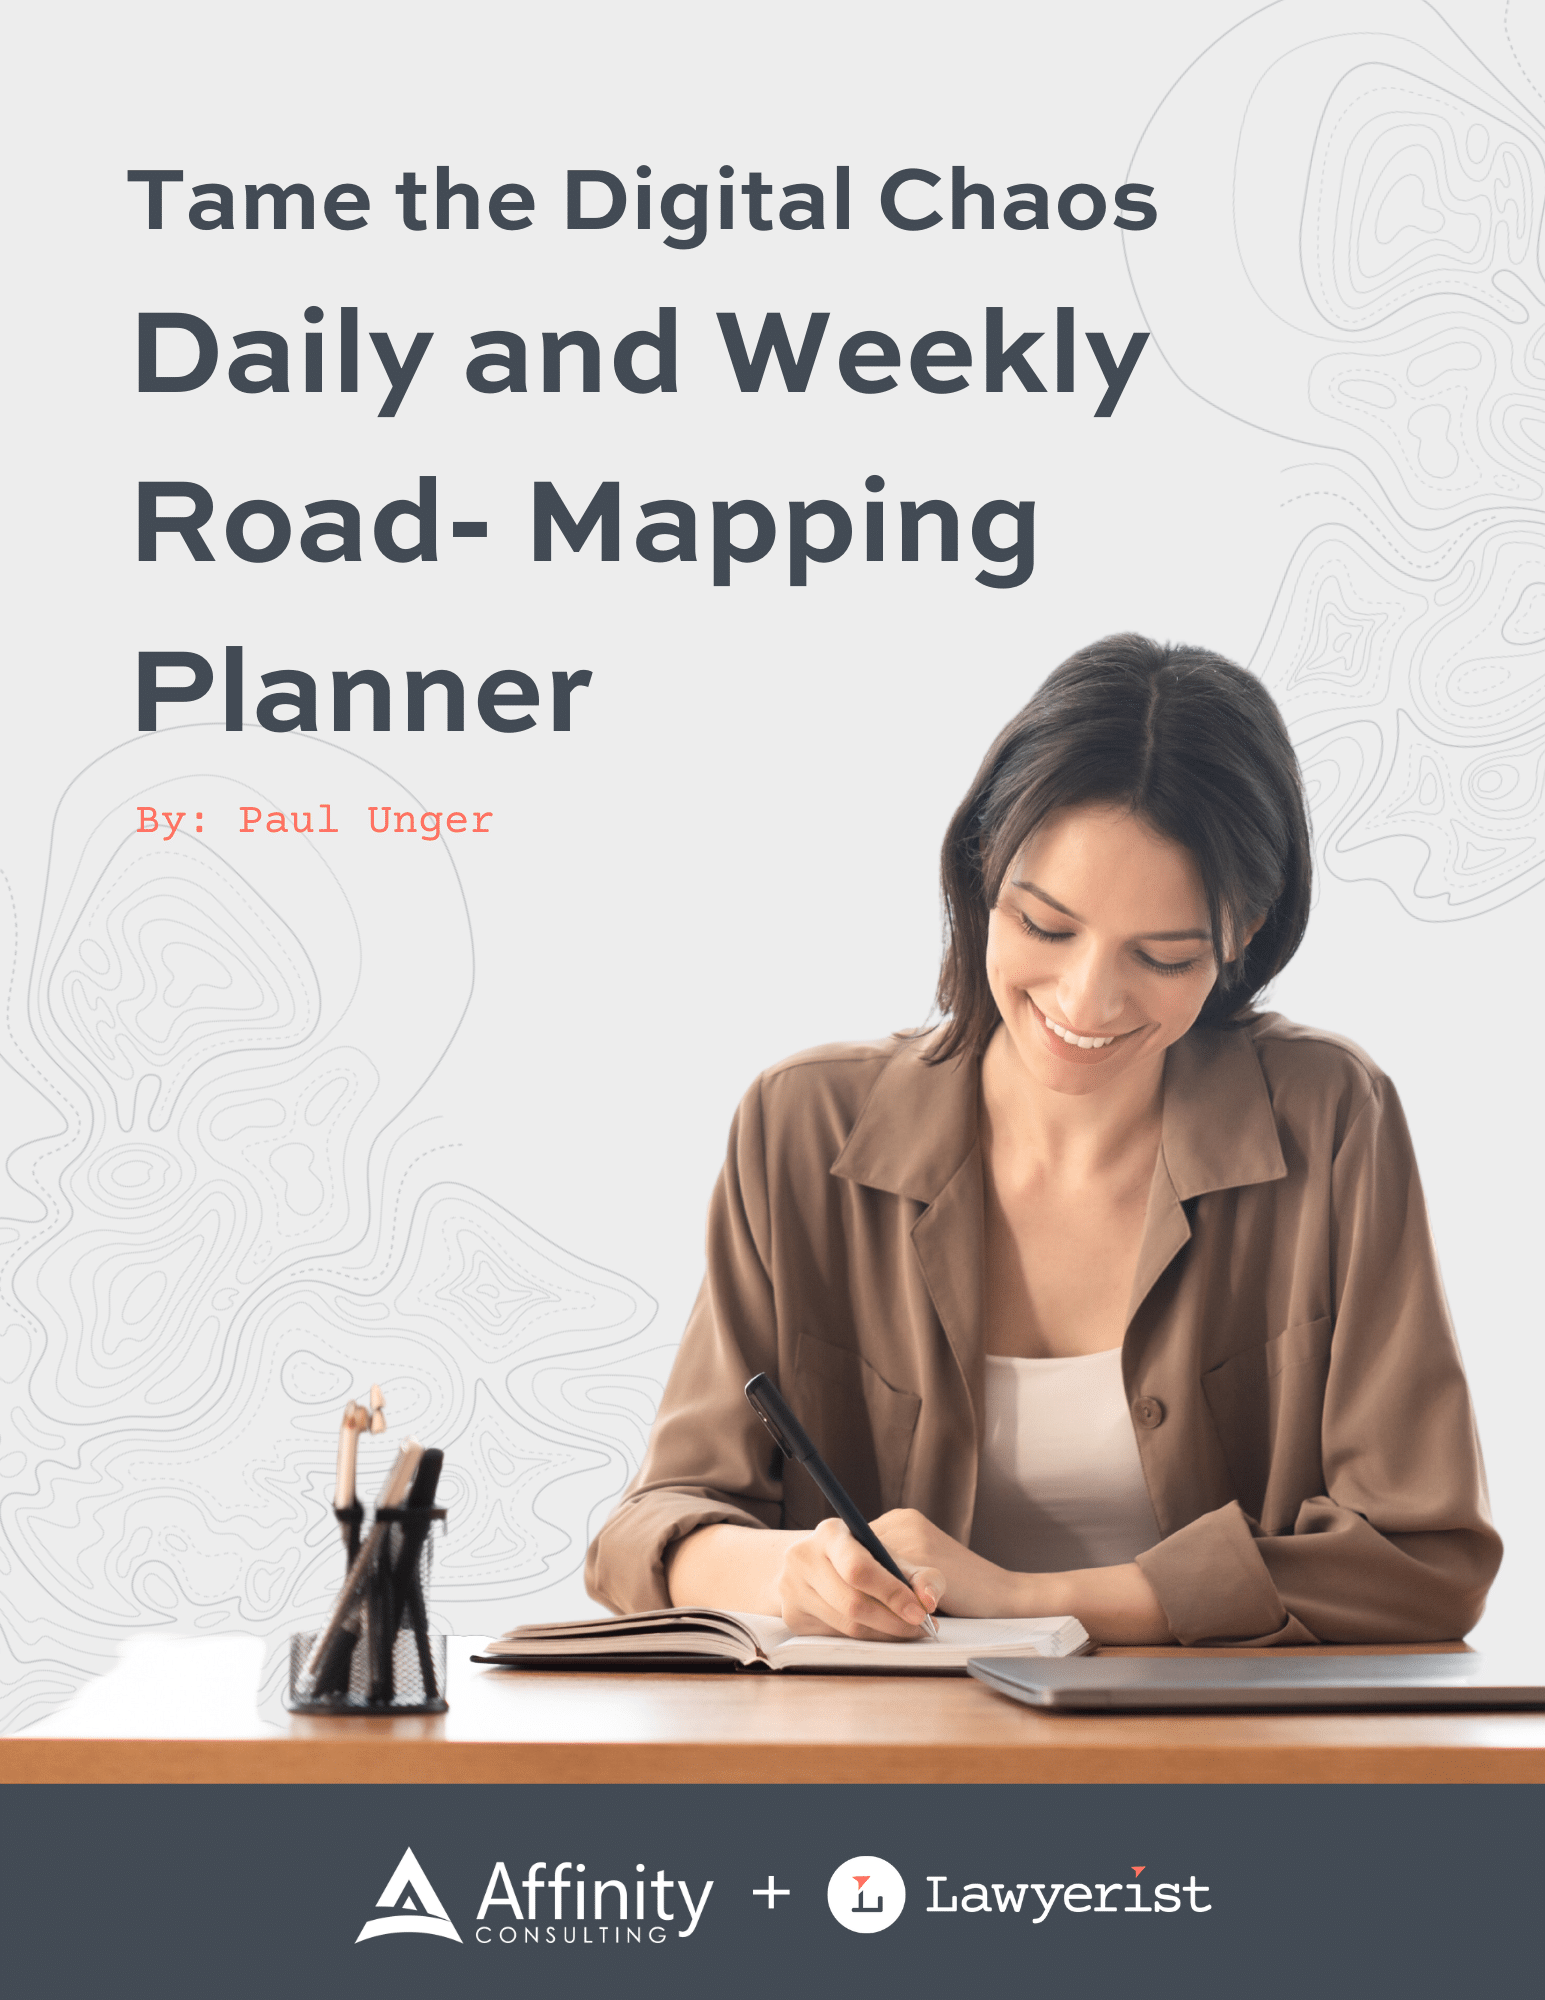 Tame the Digital Chaos Planner cover featuring a woman writing in a notebook